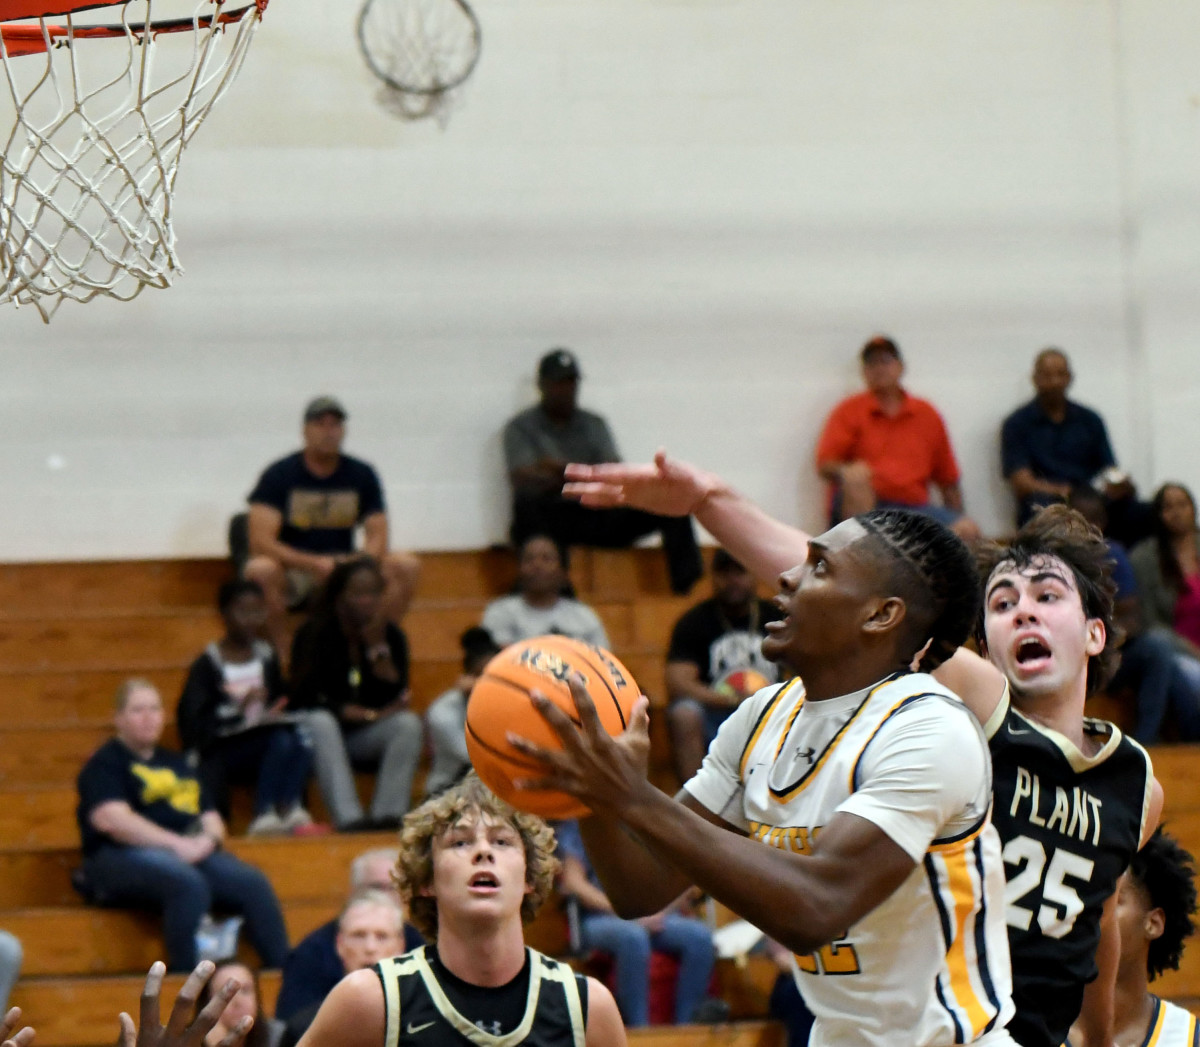 Winter Haven junior small forward Marcus Smothers drives in for a basket against Tampa Plant in a Class 7A Regional semifinal on Tuesday at Winter Haven.